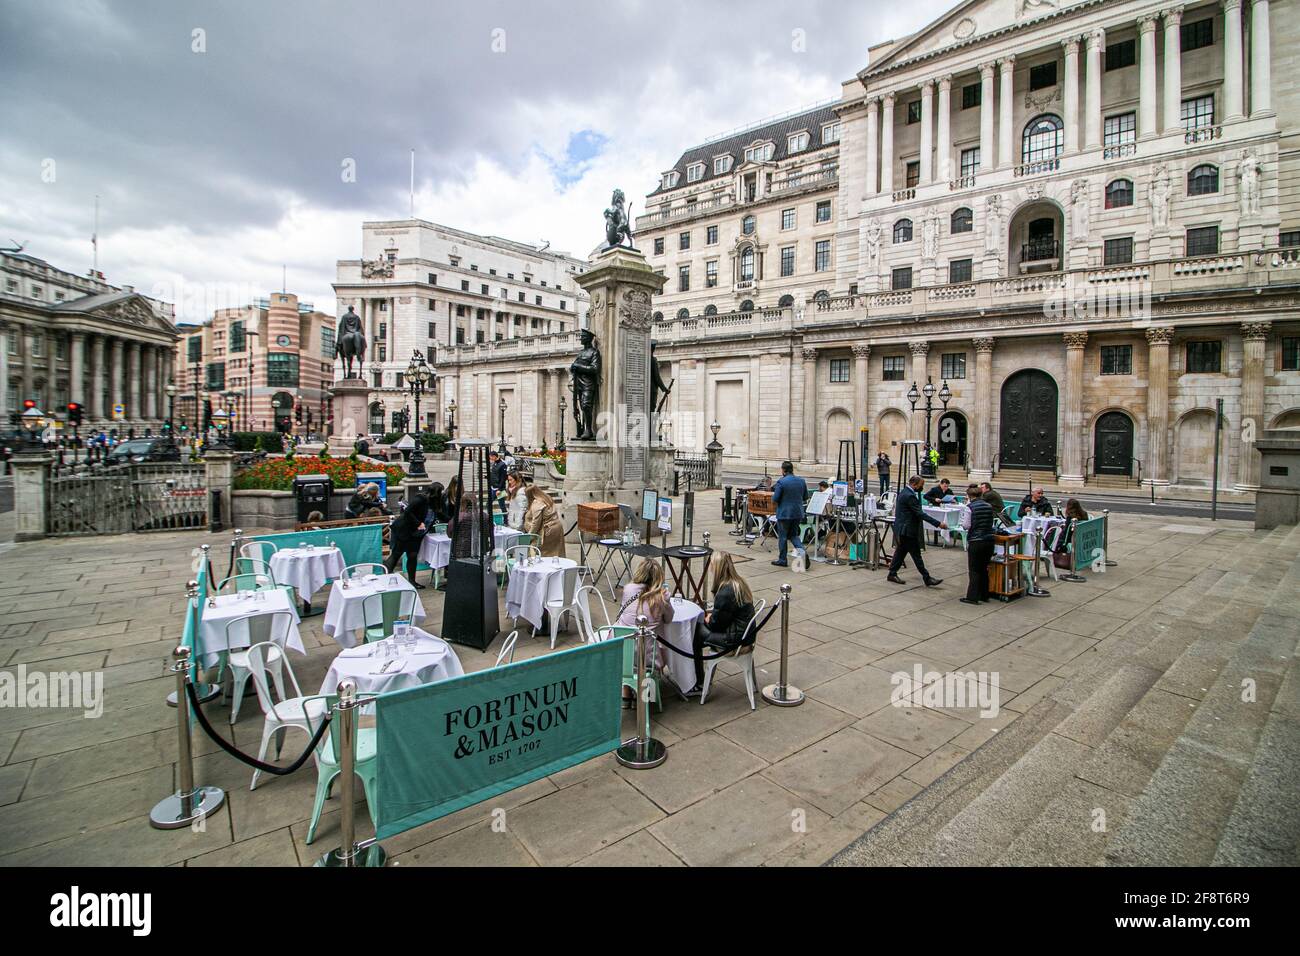 BANK LONDON, UK. 15th Apr, 2021. People are being served food and drink at Fortnum and Mason in Bank financial district offering al fresco dining following the UK government's easing of lockdown restrictions which allowed non-essential businesses to reopen since Monday 12 April. Credit: amer ghazzal/Alamy Live News Stock Photo